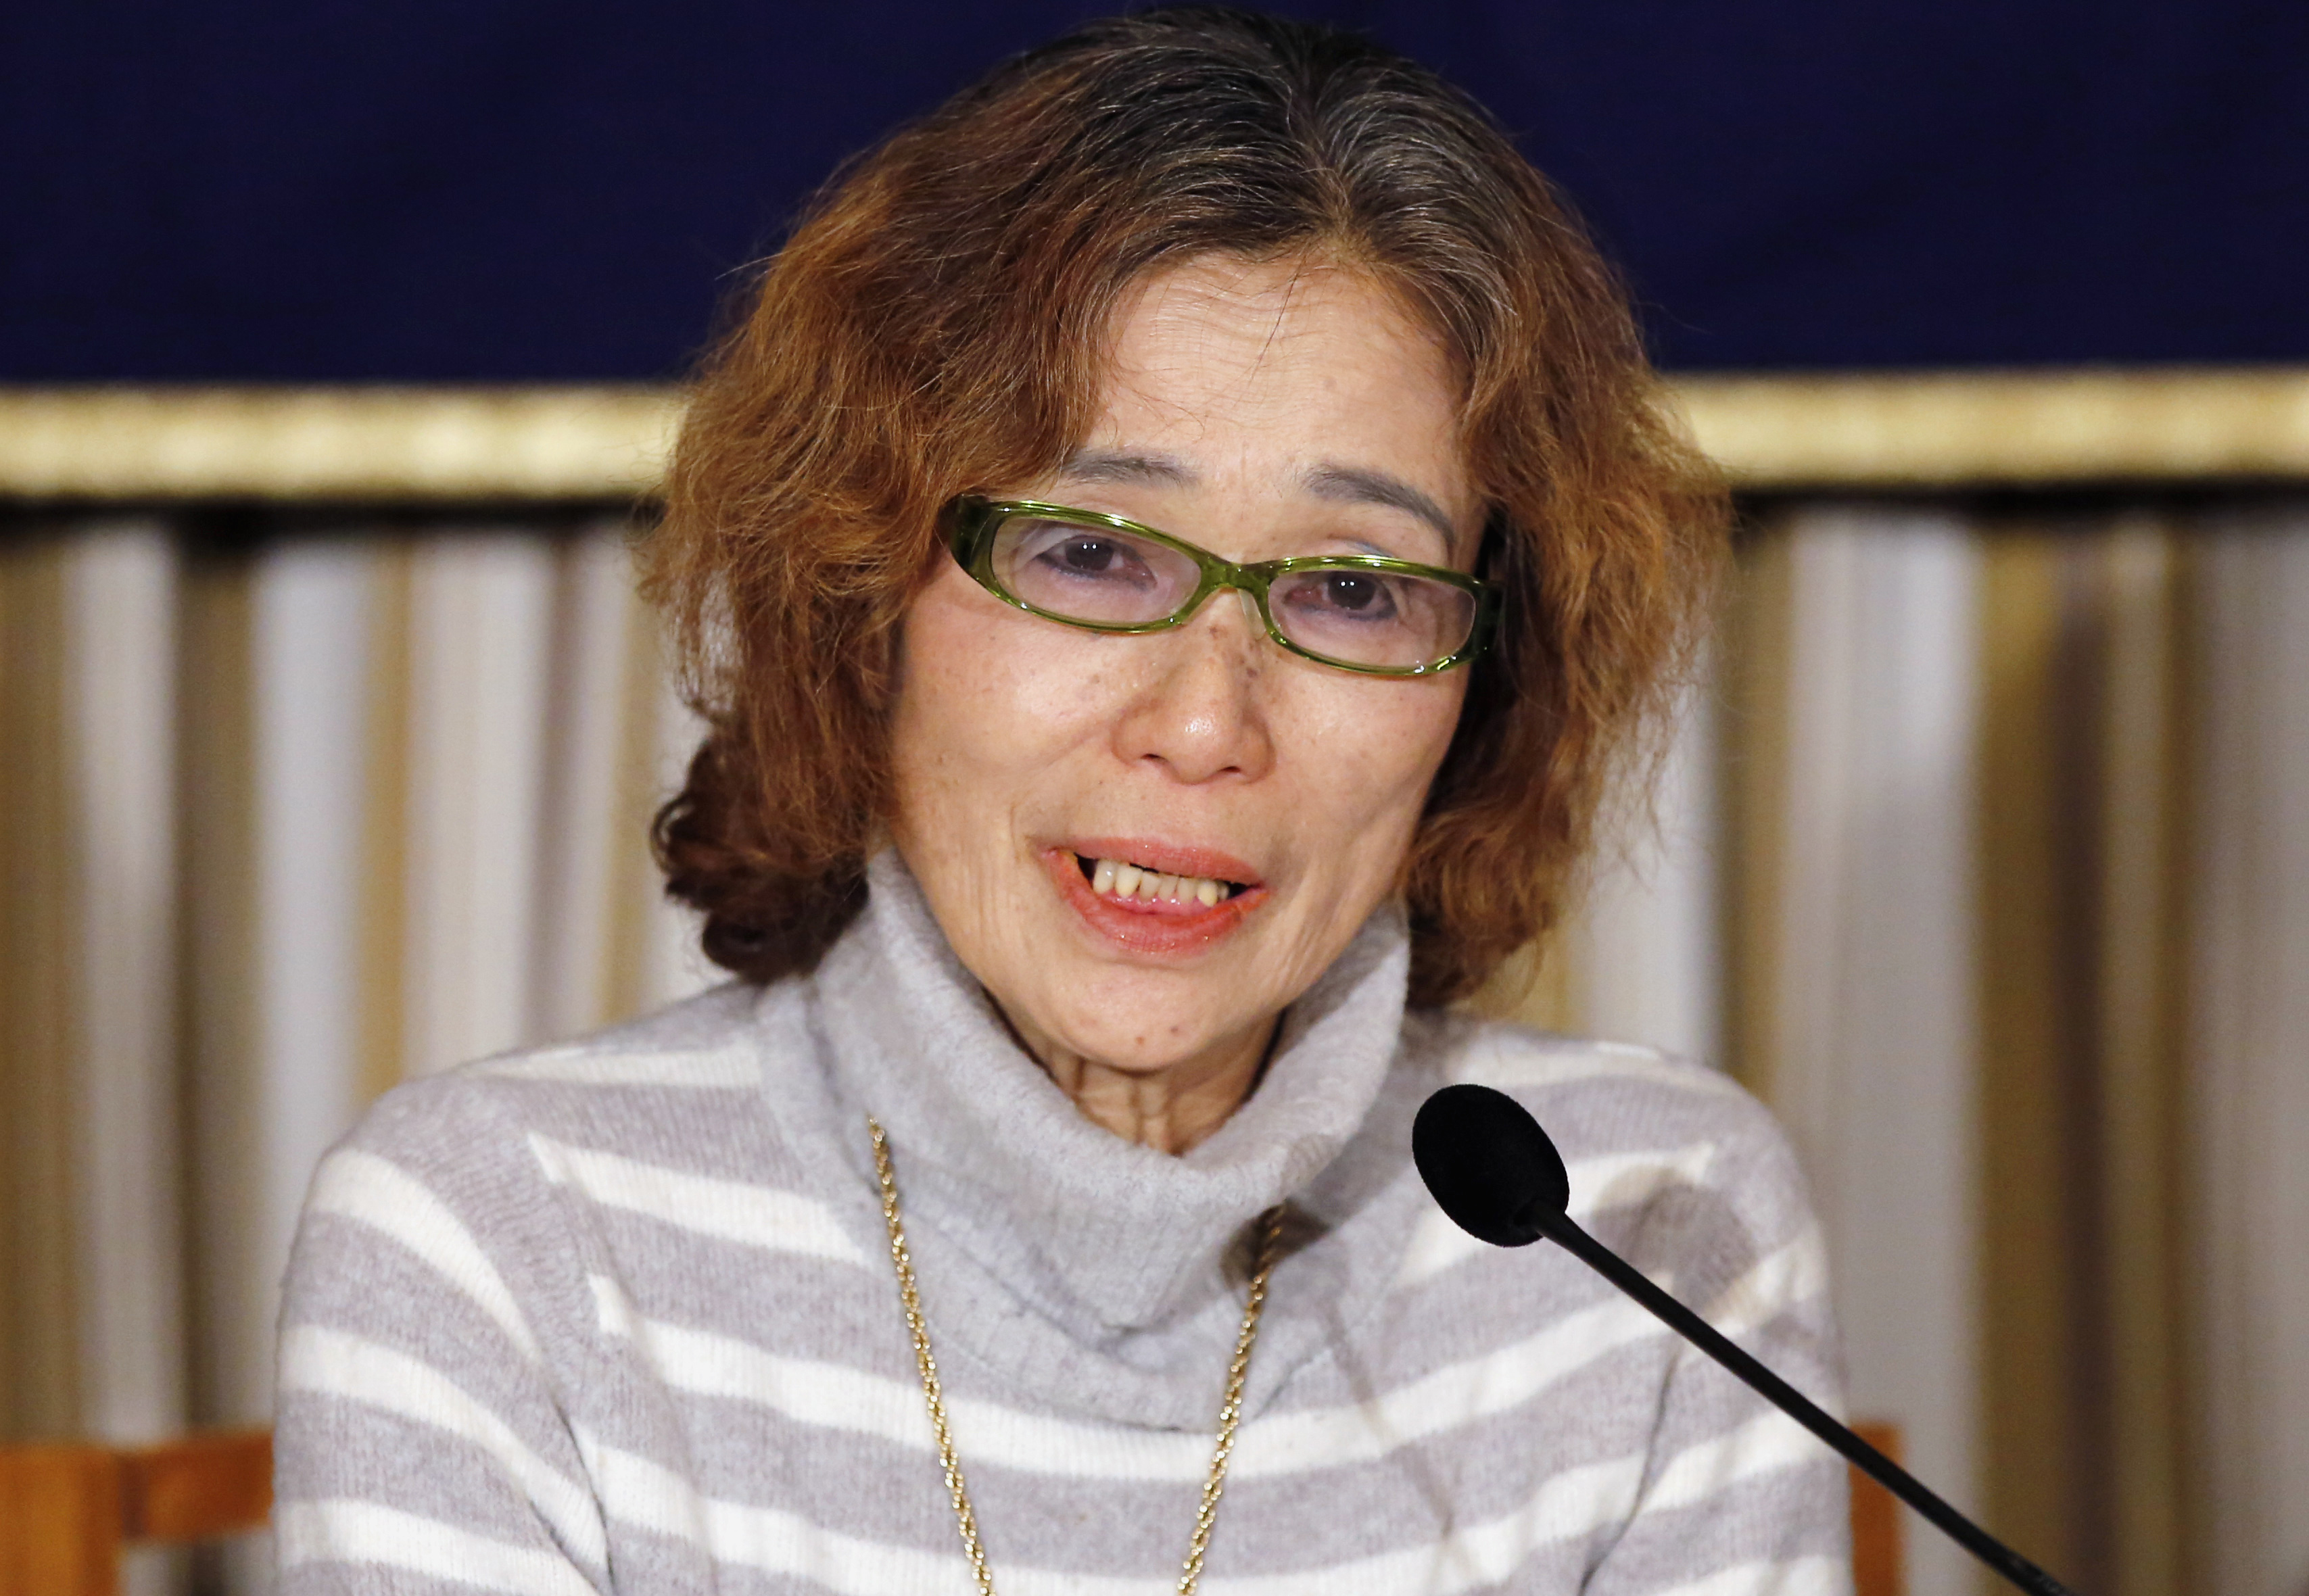 Junko Ishido, mother of Kenji Goto, a Japanese journalist being held captive by Islamic State militants along with another Japanese citizen, speaks during a news conference at the Foreign Correspondents' Club of Japan in Tokyo on Jan. 23, 2015 (Toru Hanai—Reuters)